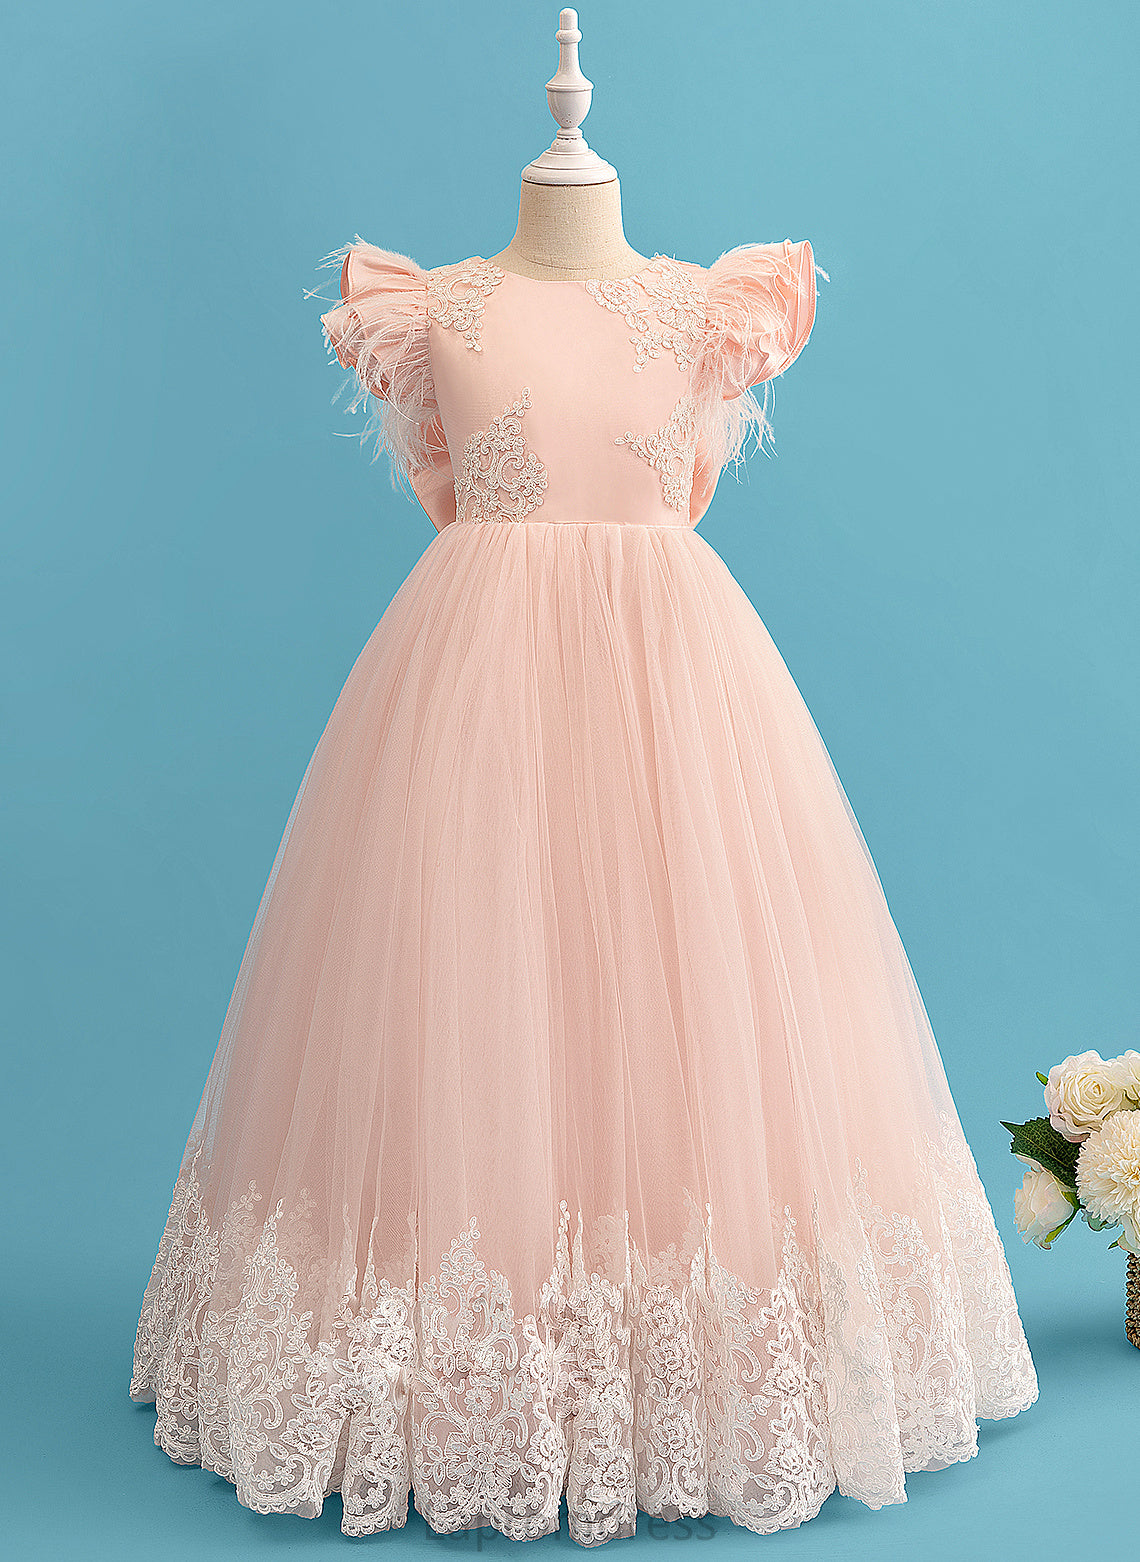 Ruffles/Feather/Bow(s) Dress Neck With Girl - Flower Ball-Gown/Princess Short Scoop Bethany Flower Girl Dresses Lace Sleeves Floor-length